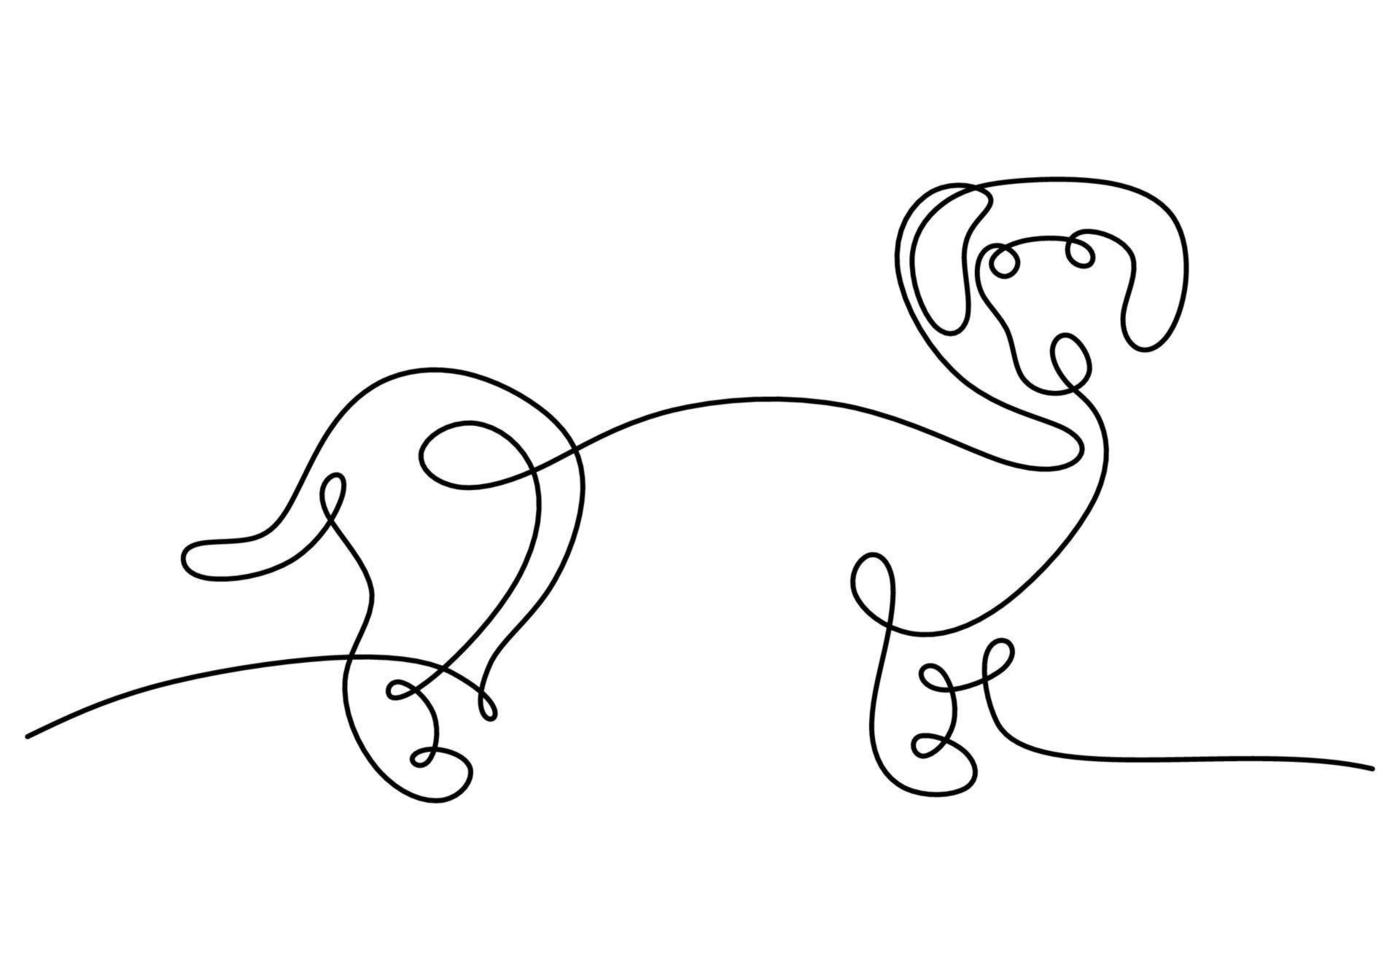 Hand drawn one single continuous line of puppy dog on white background vector